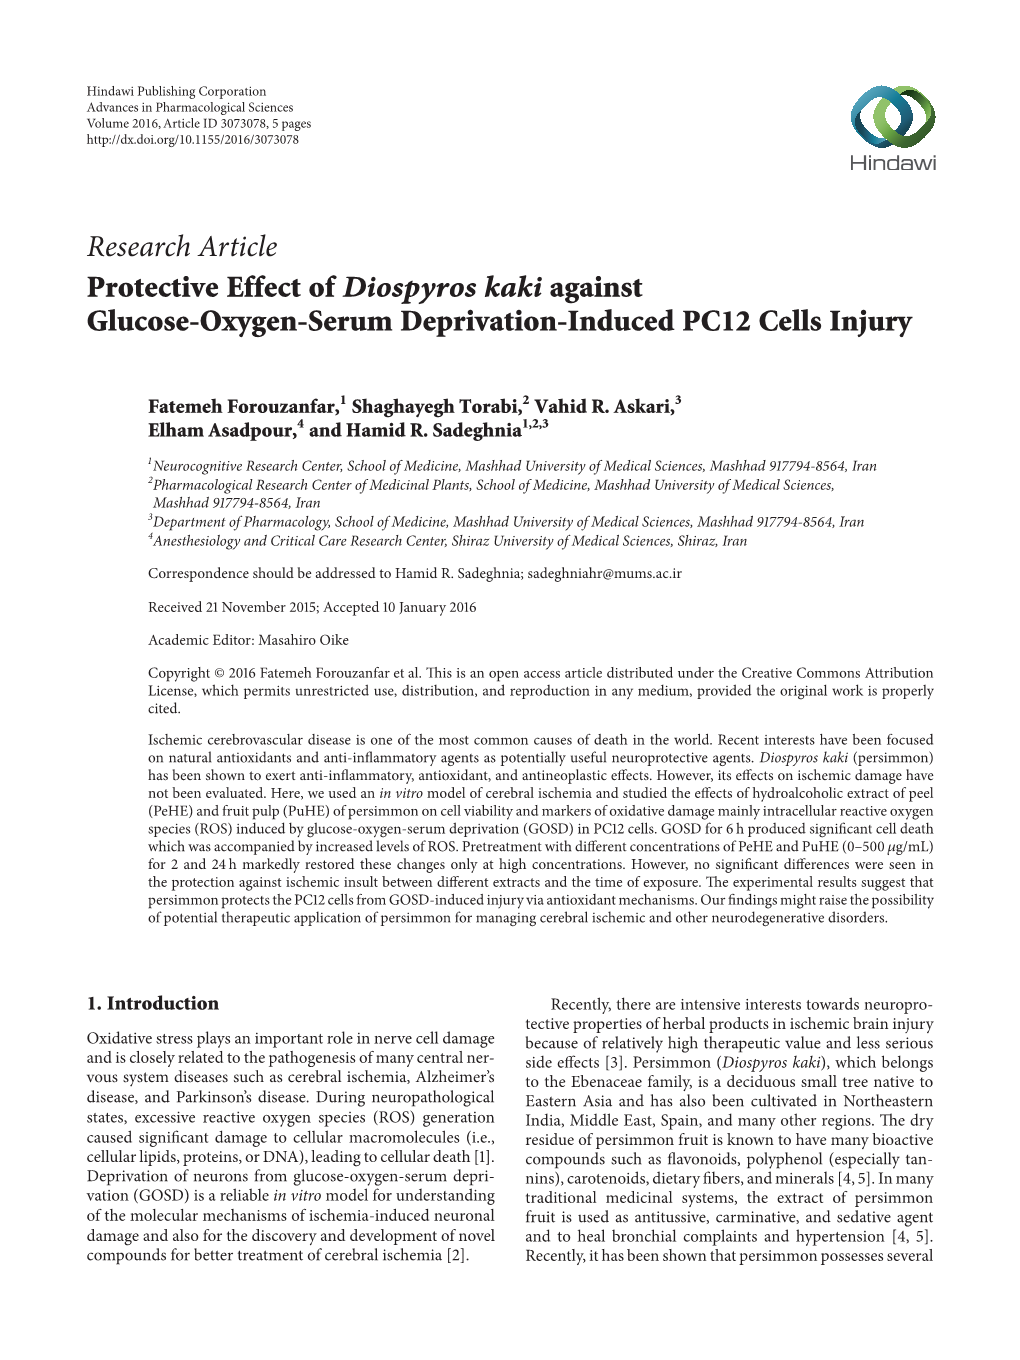 Protective Effect of Diospyros Kaki Against Glucose-Oxygen-Serum Deprivation-Induced PC12 Cells Injury